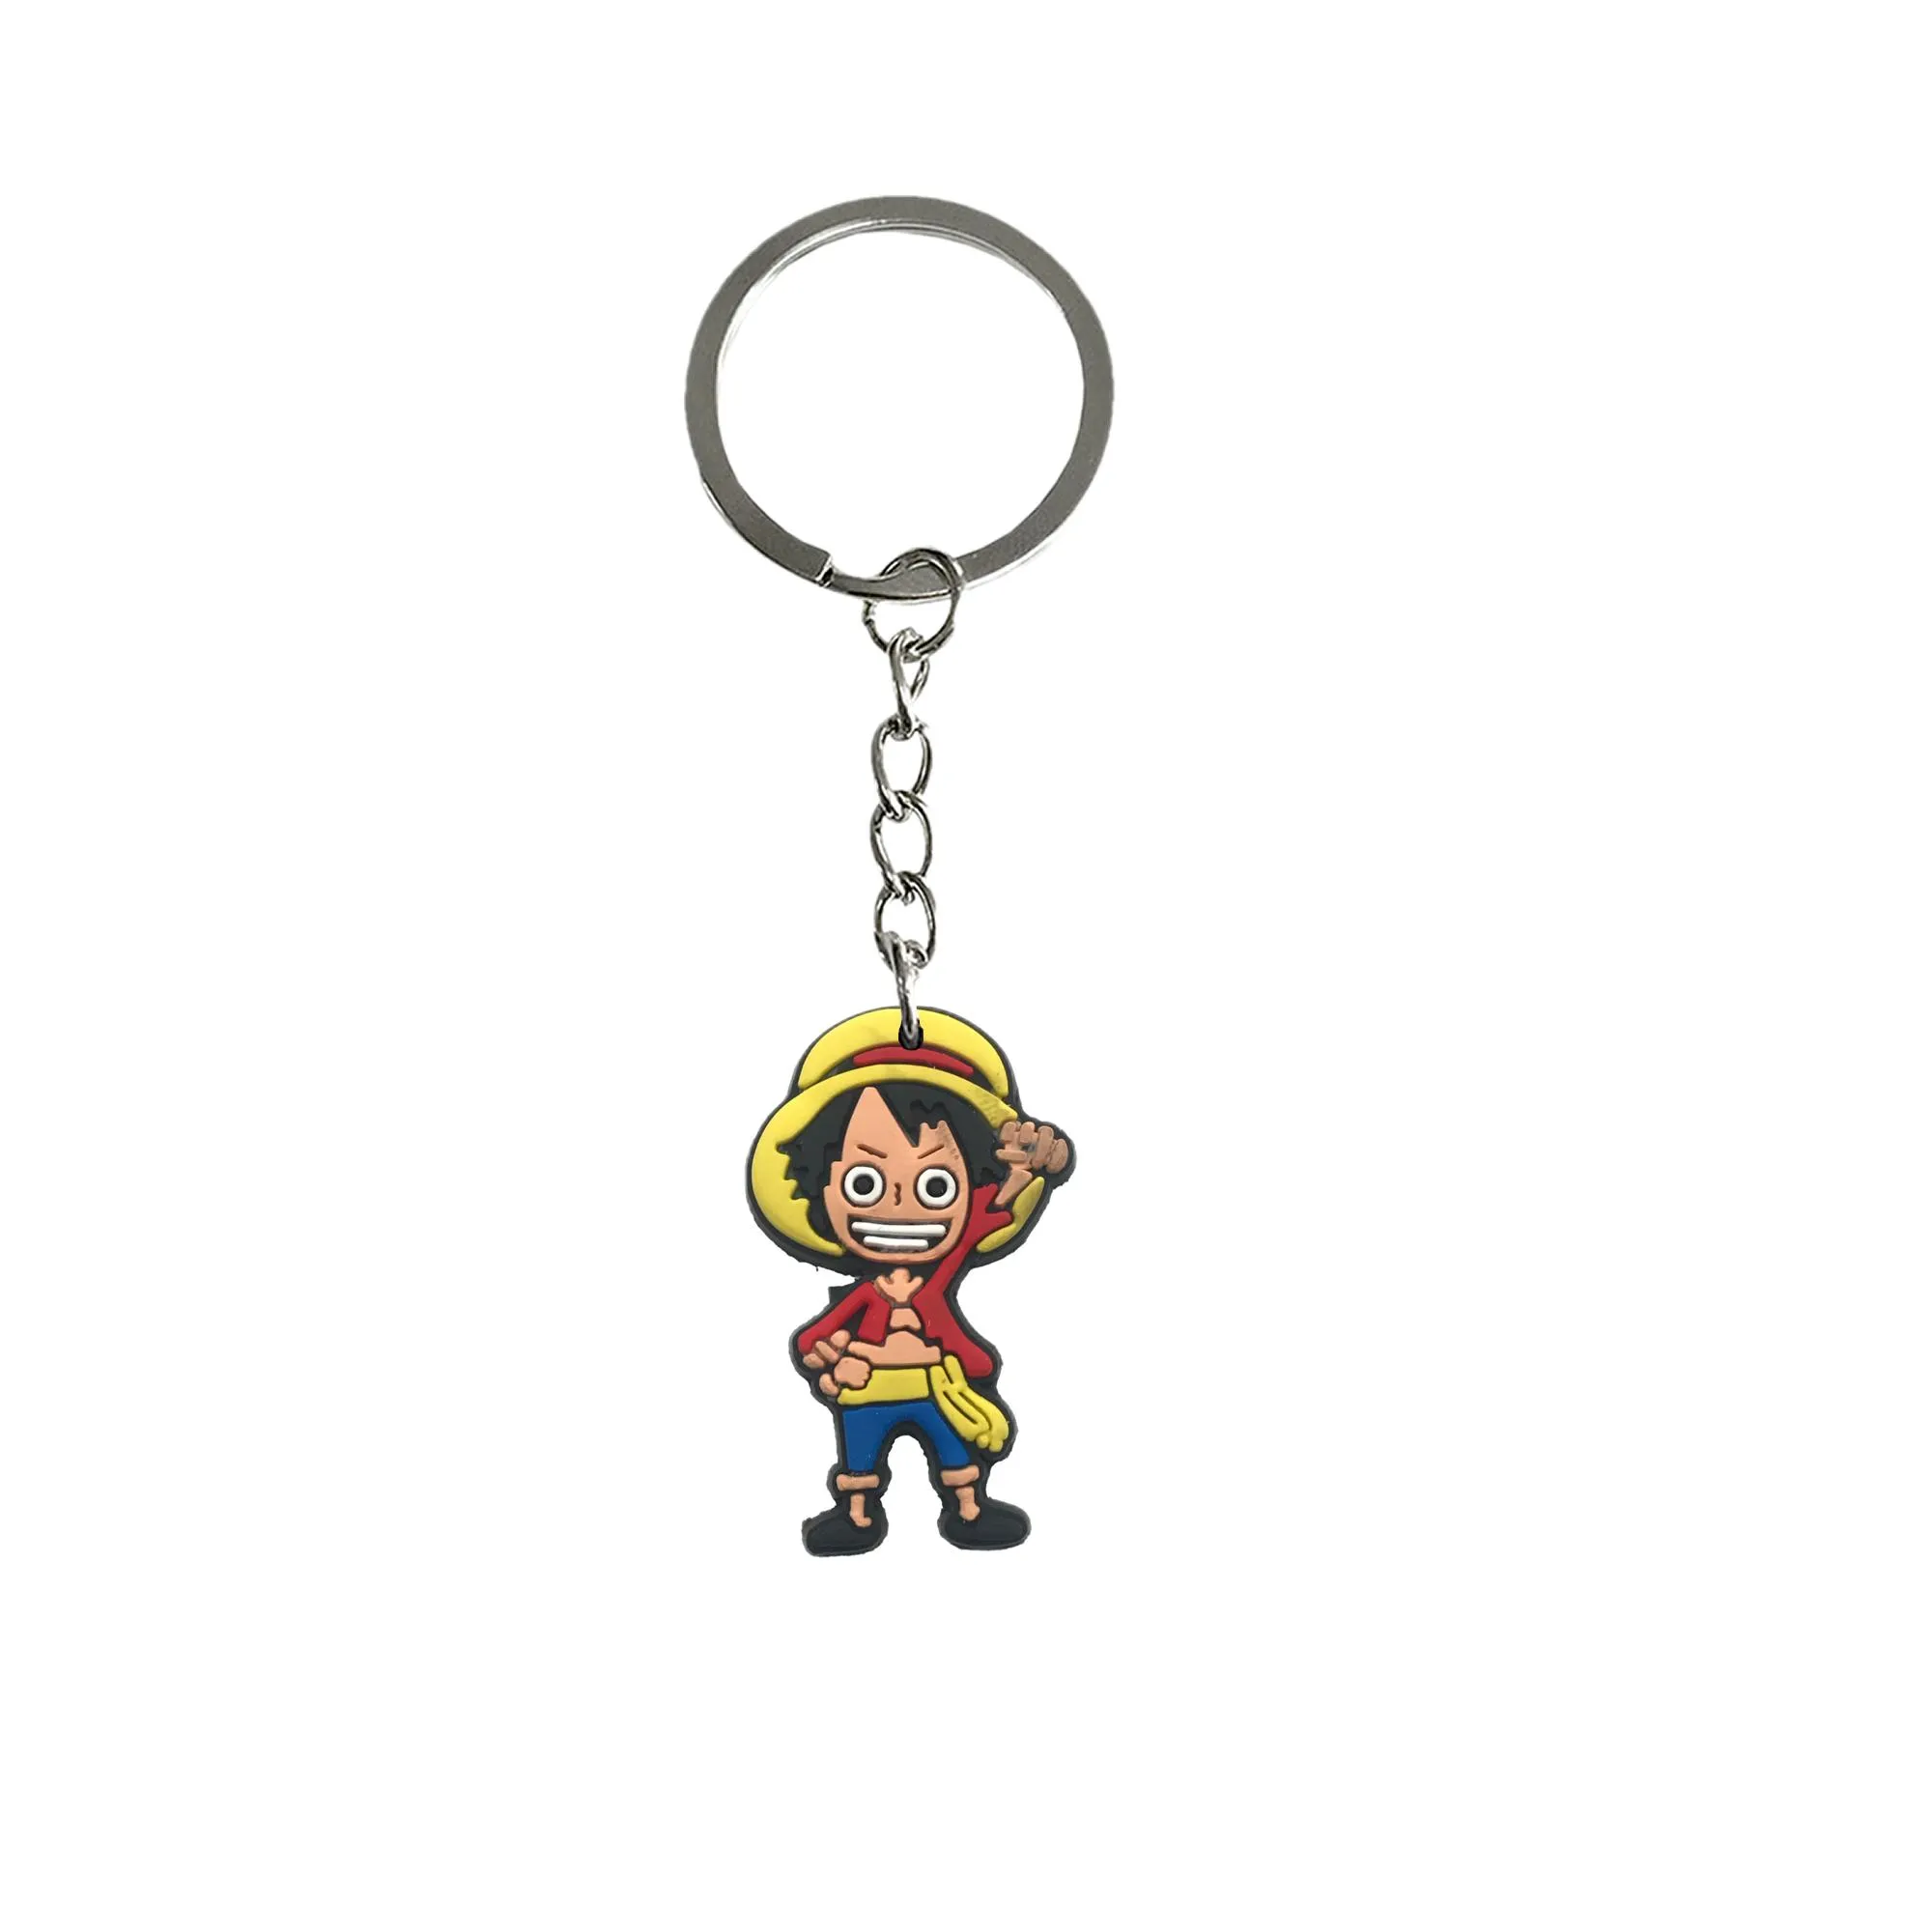 pirate king keychain keyring for backpacks backpack car charms anime cool keychains suitable schoolbag colorful character with wristlet key ring boys keyrings bags